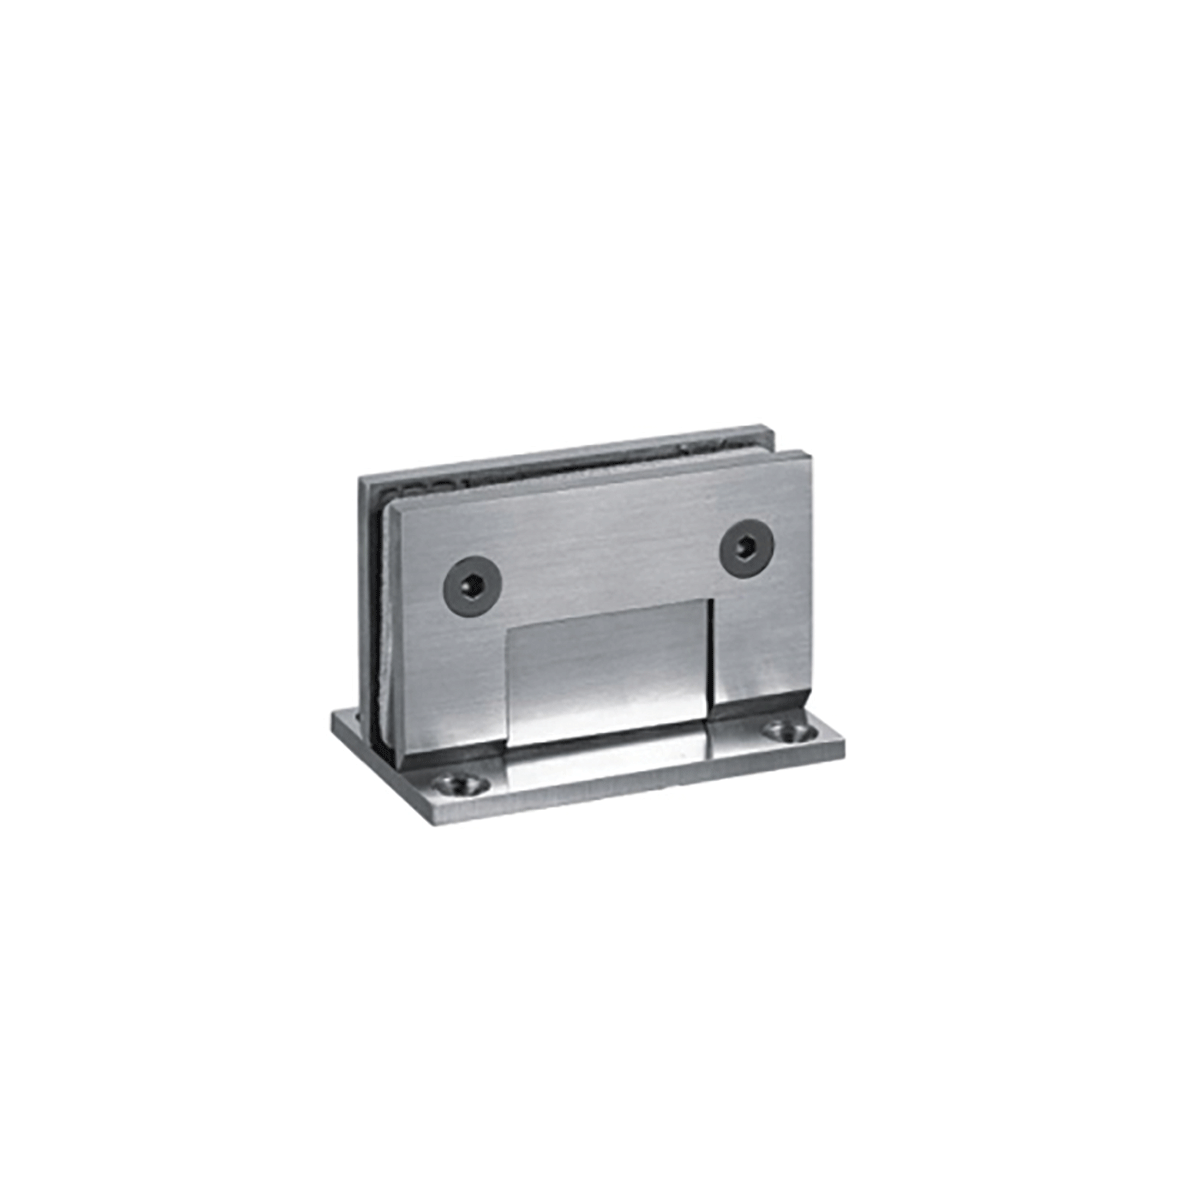 Picture of SA 8500G-6 ix SAT Fixed clamp wall/glass, NET PRICE!